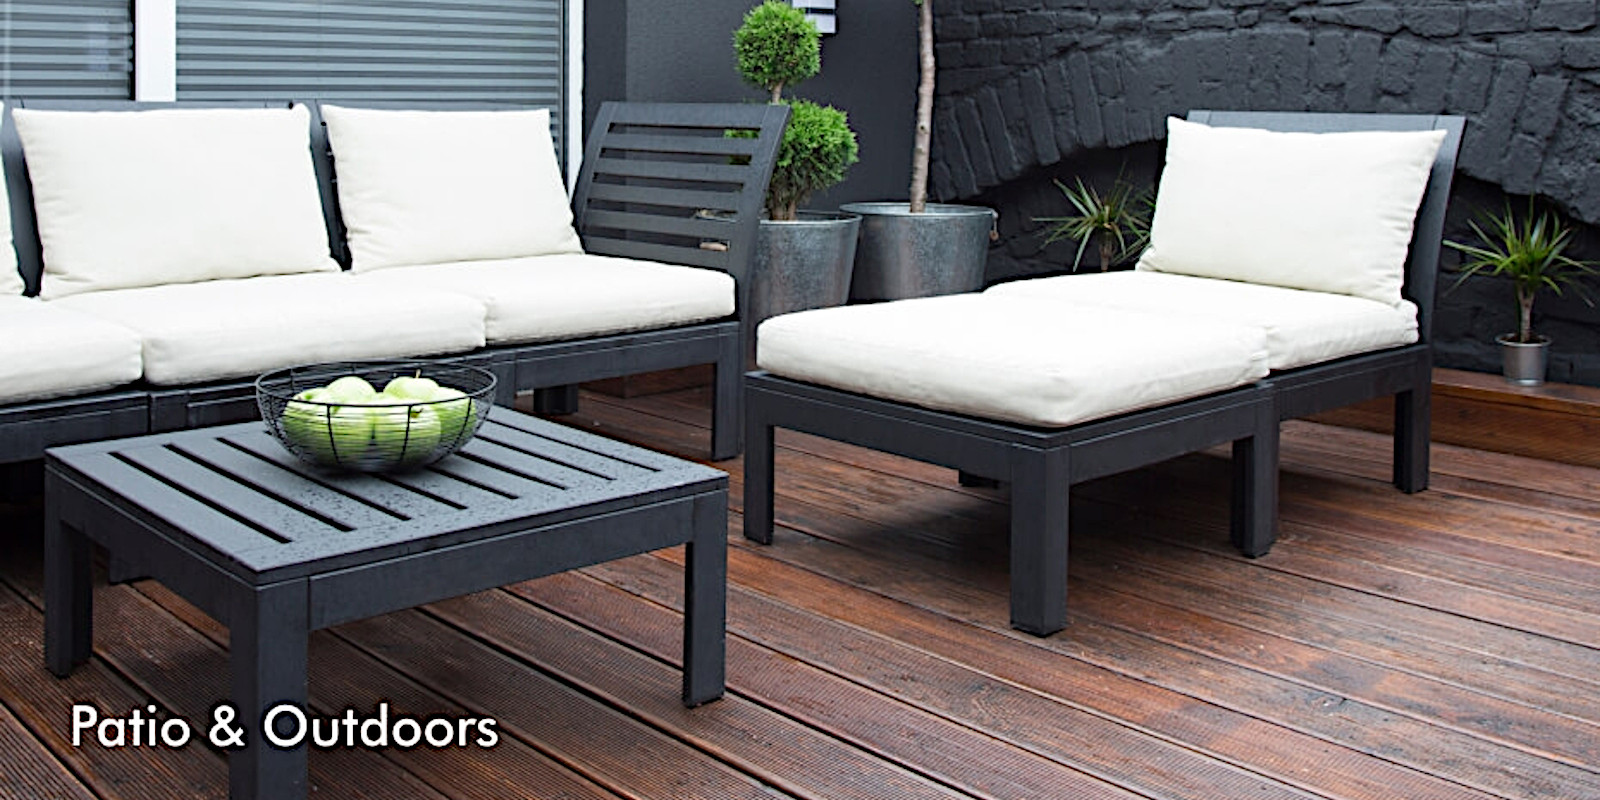 Patio furniture affordable price